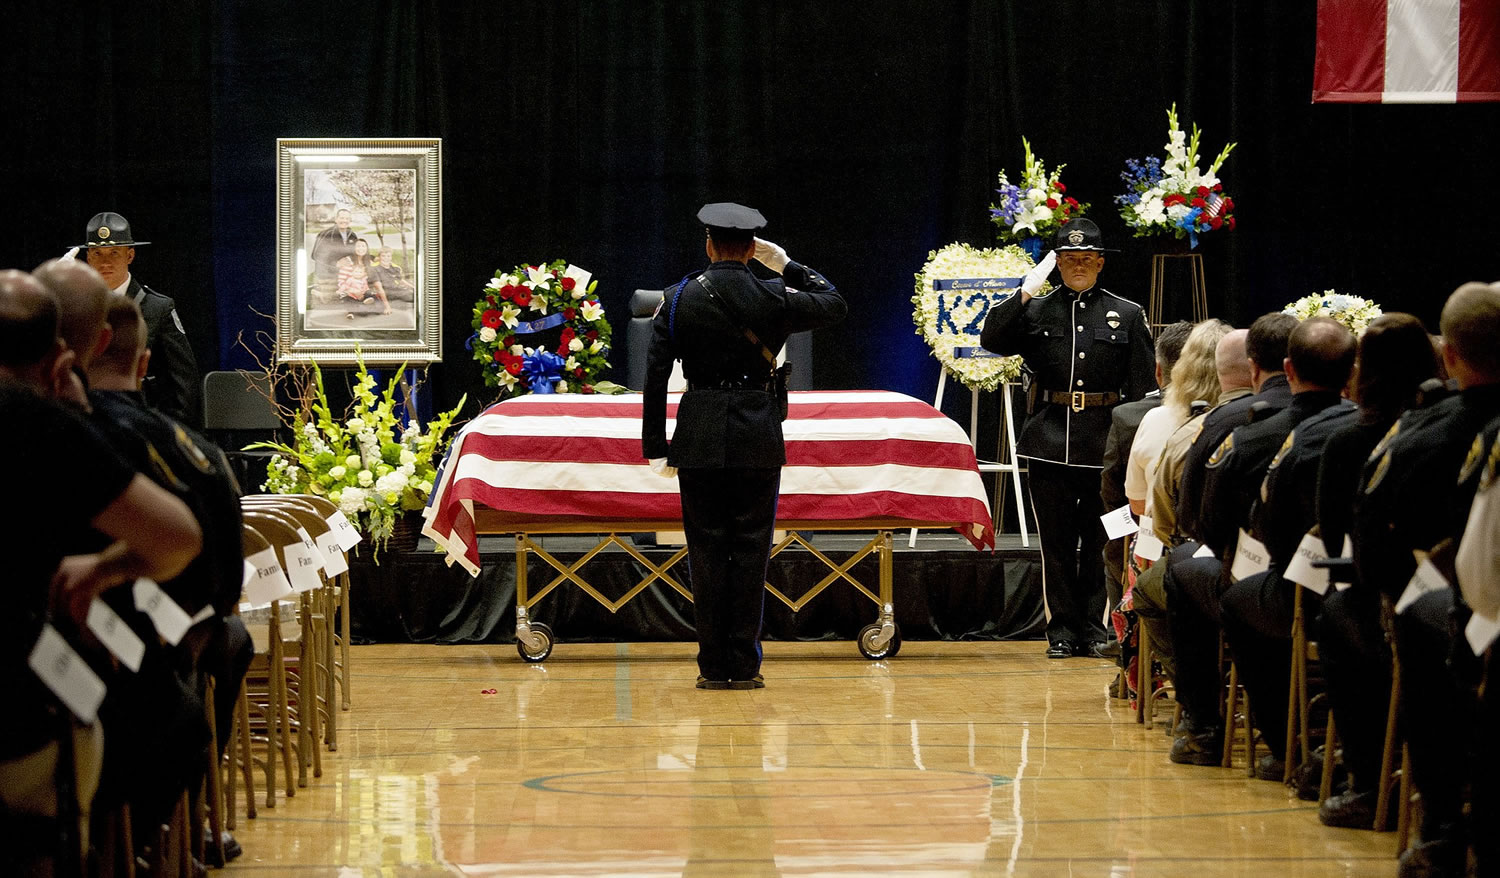 An officer salutes the flag draped coffin the funeral service at Lake City High School on Saturday.